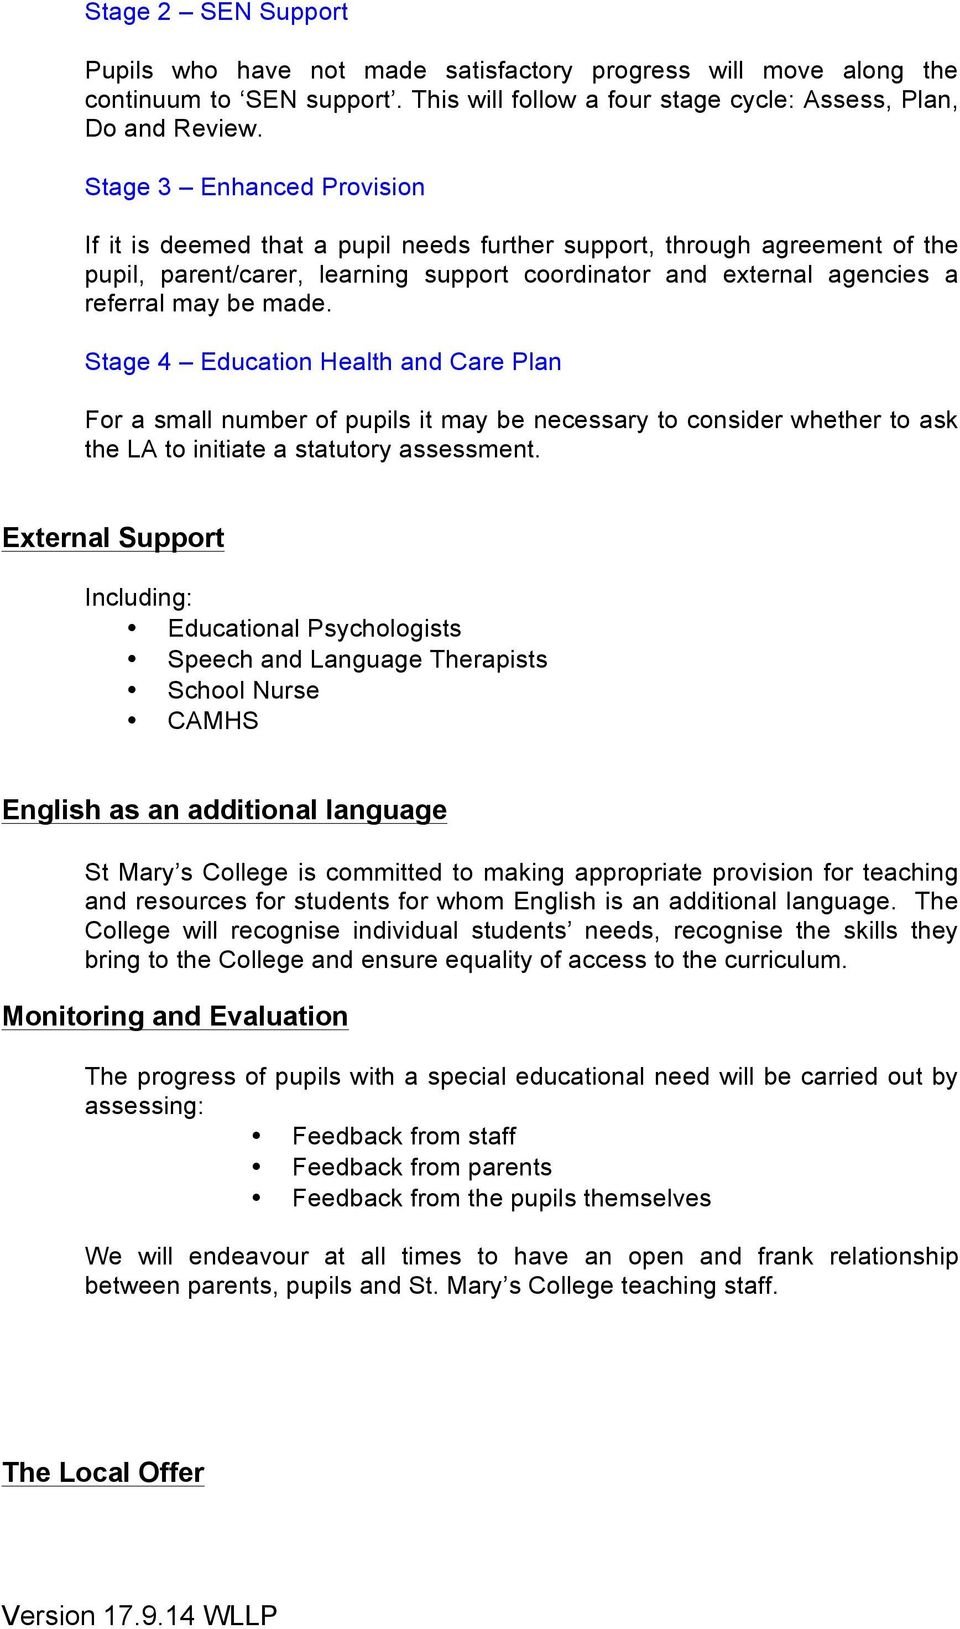 Stage 4 Education Health and Care Plan For a small number of pupils it may be necessary to consider whether to ask the LA to initiate a statutory assessment.